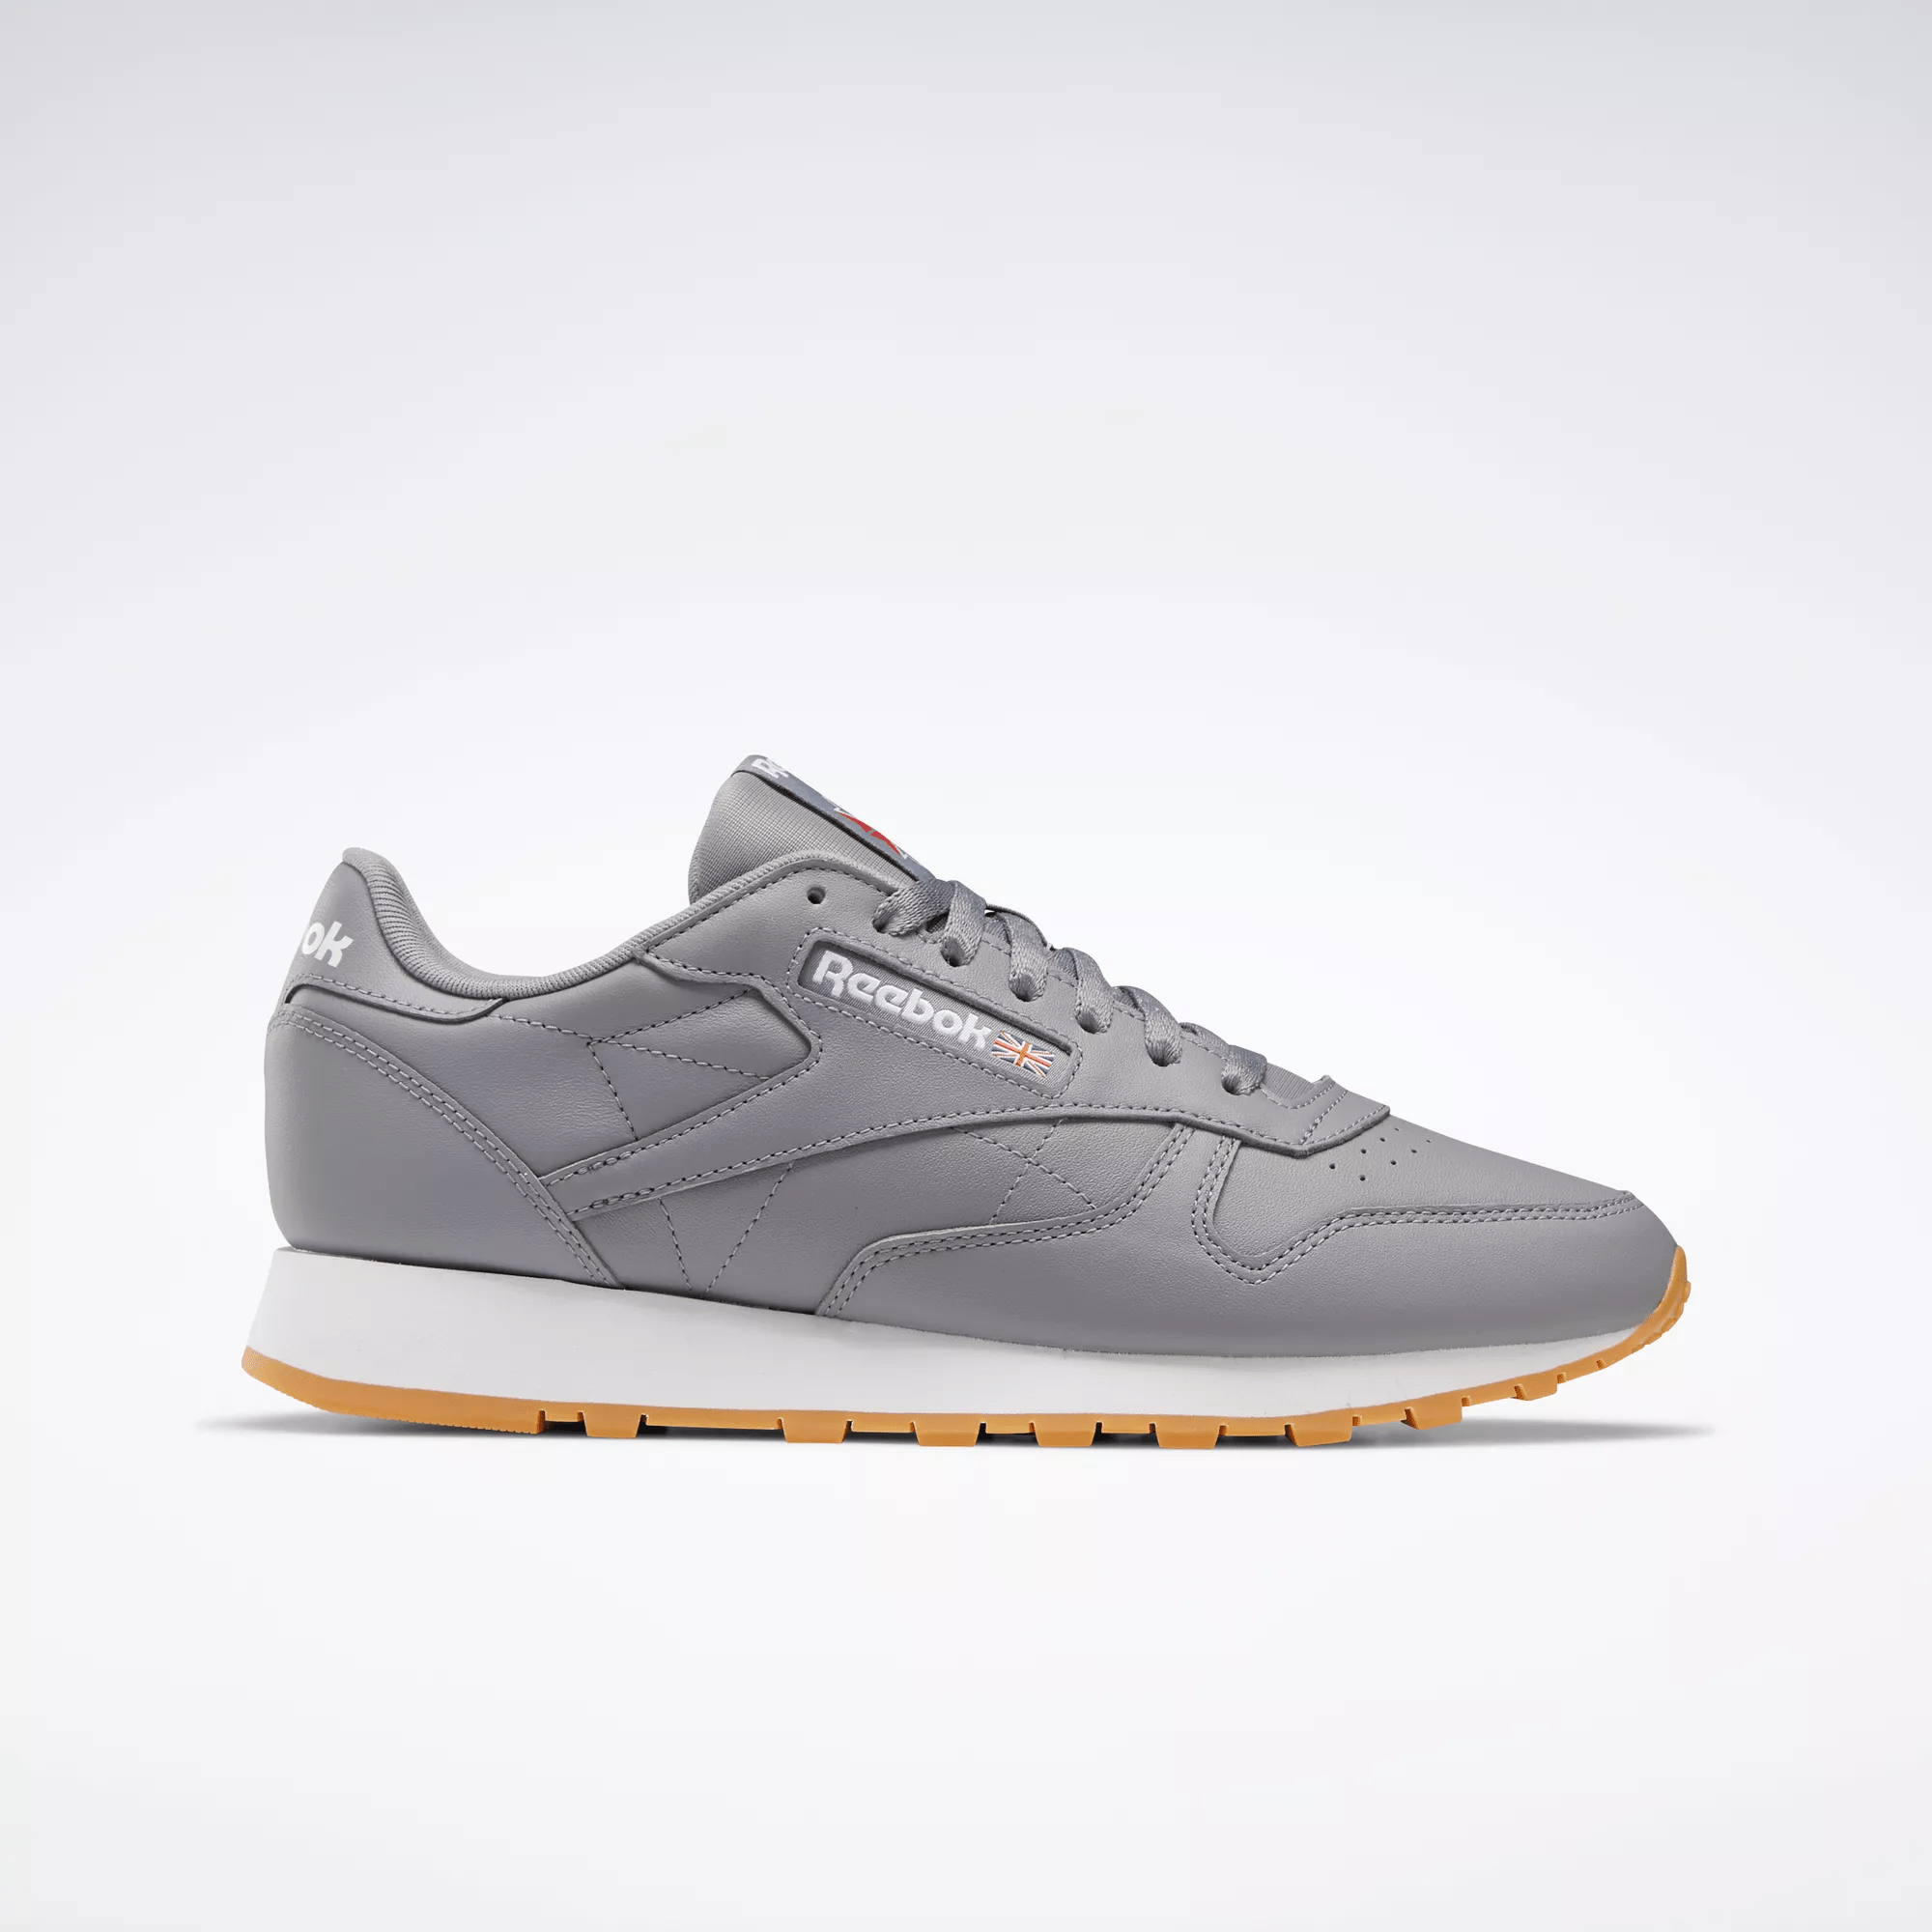 Reebok Classic Leather Shoes In Grey